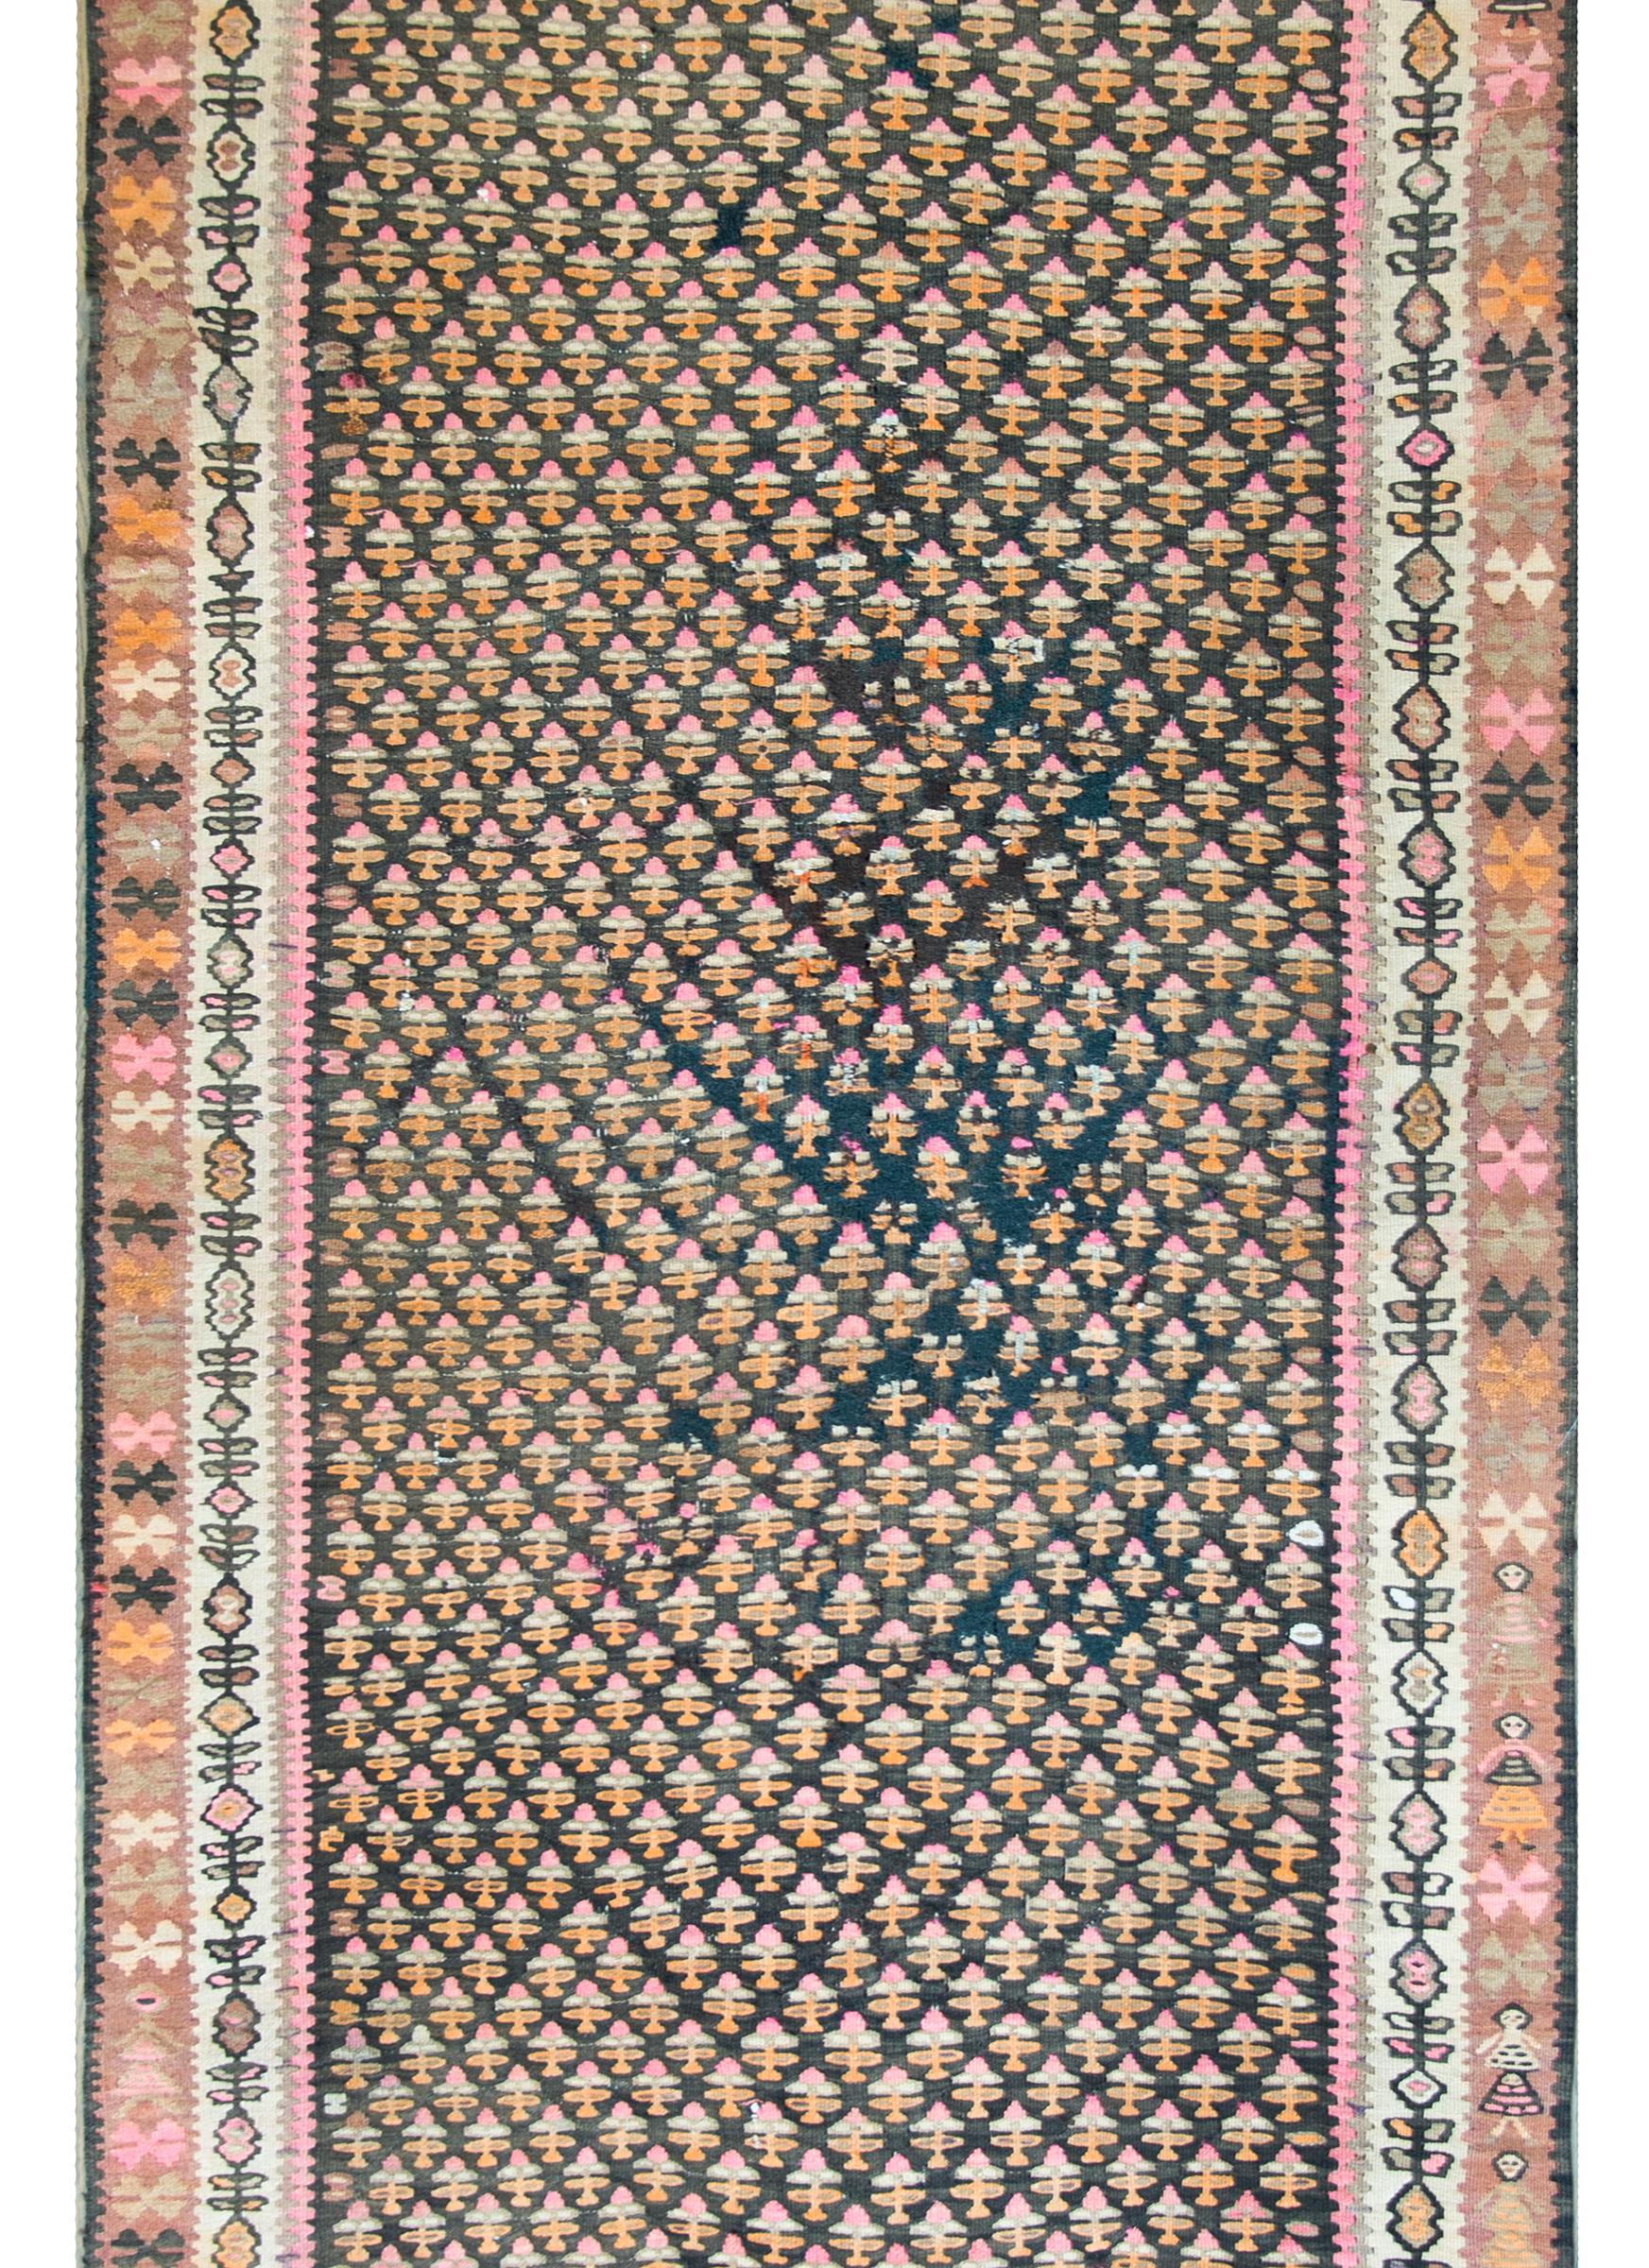 An incredible early 20th century Kurdish Kilim rug with an all-over stylized tree-of-life pattern woven in pink, orange, and cream colors wool, set against a black ground, and framed by a complex border containing several geometric patterned borders.